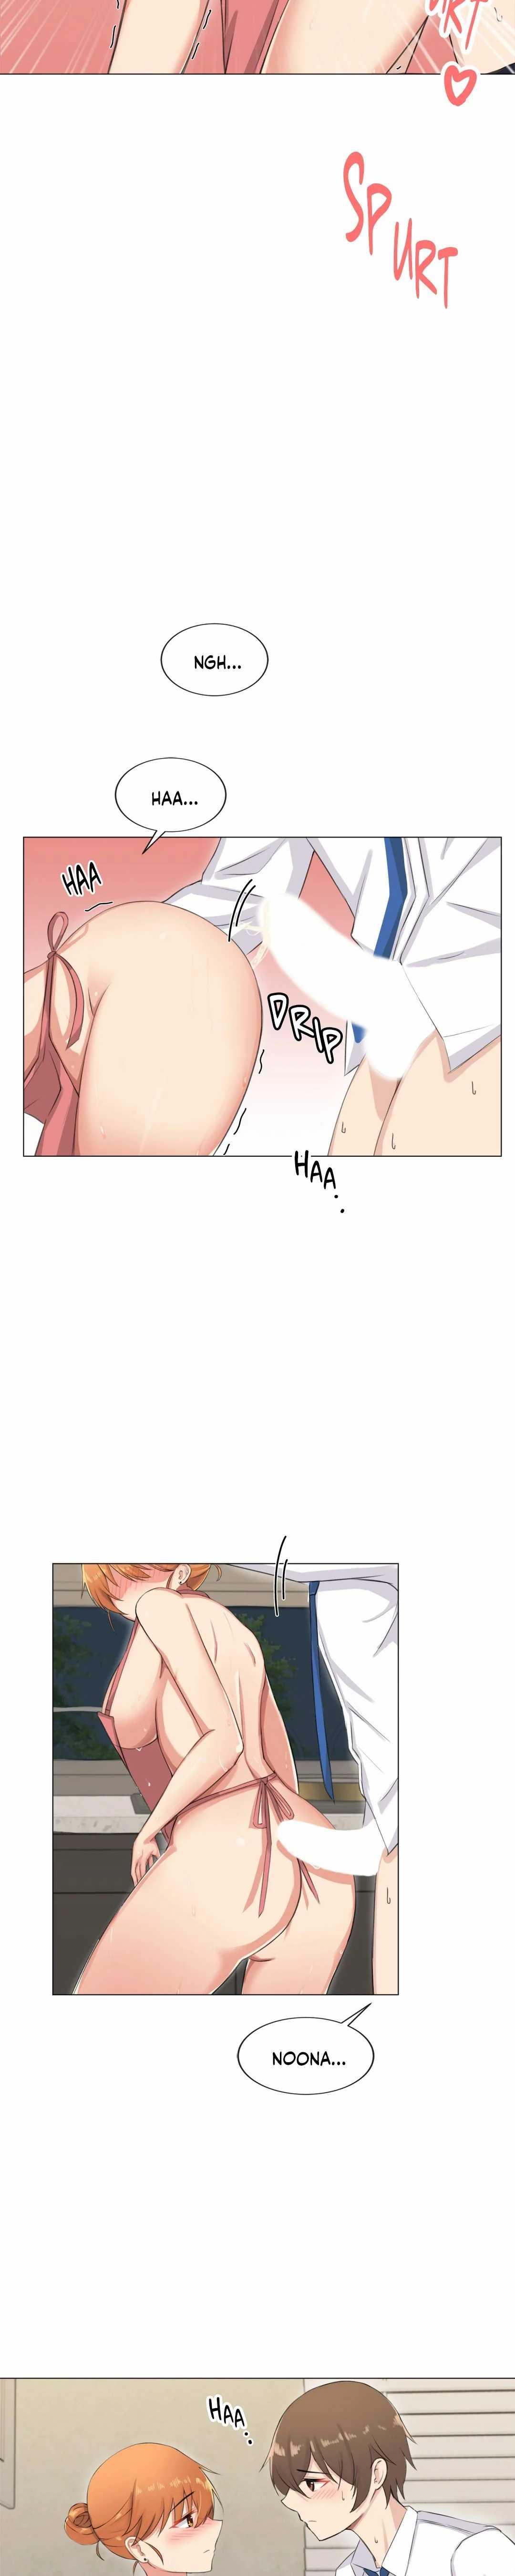 [Dumangoon, 130F] Sexcape Room: Pile Up Ch.9/9 [English] [Manhwa PDF] Completed 122